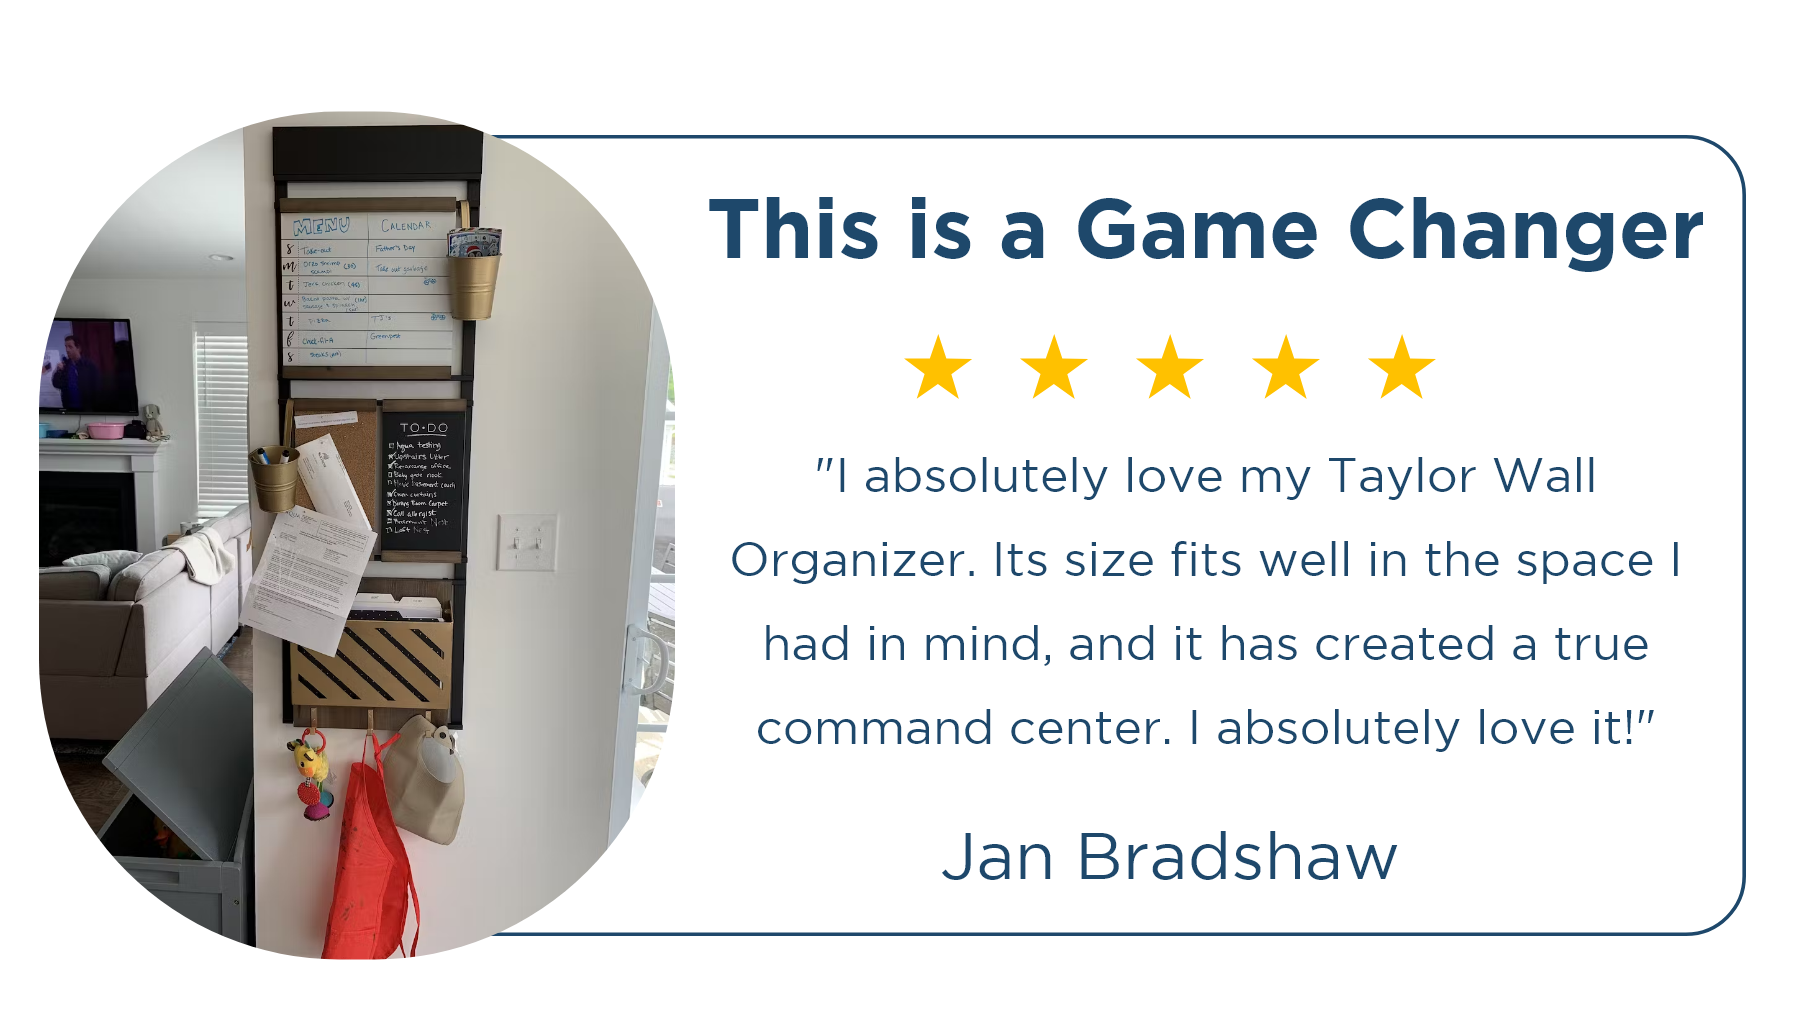 ⭐⭐⭐⭐⭐ Jan Bradshaw | This is a Game Changer "I absolutely love my Taylor Wall Organizer. Its size fits well in the space I had in mind, and it has created a true command center. I absolutely love it!"